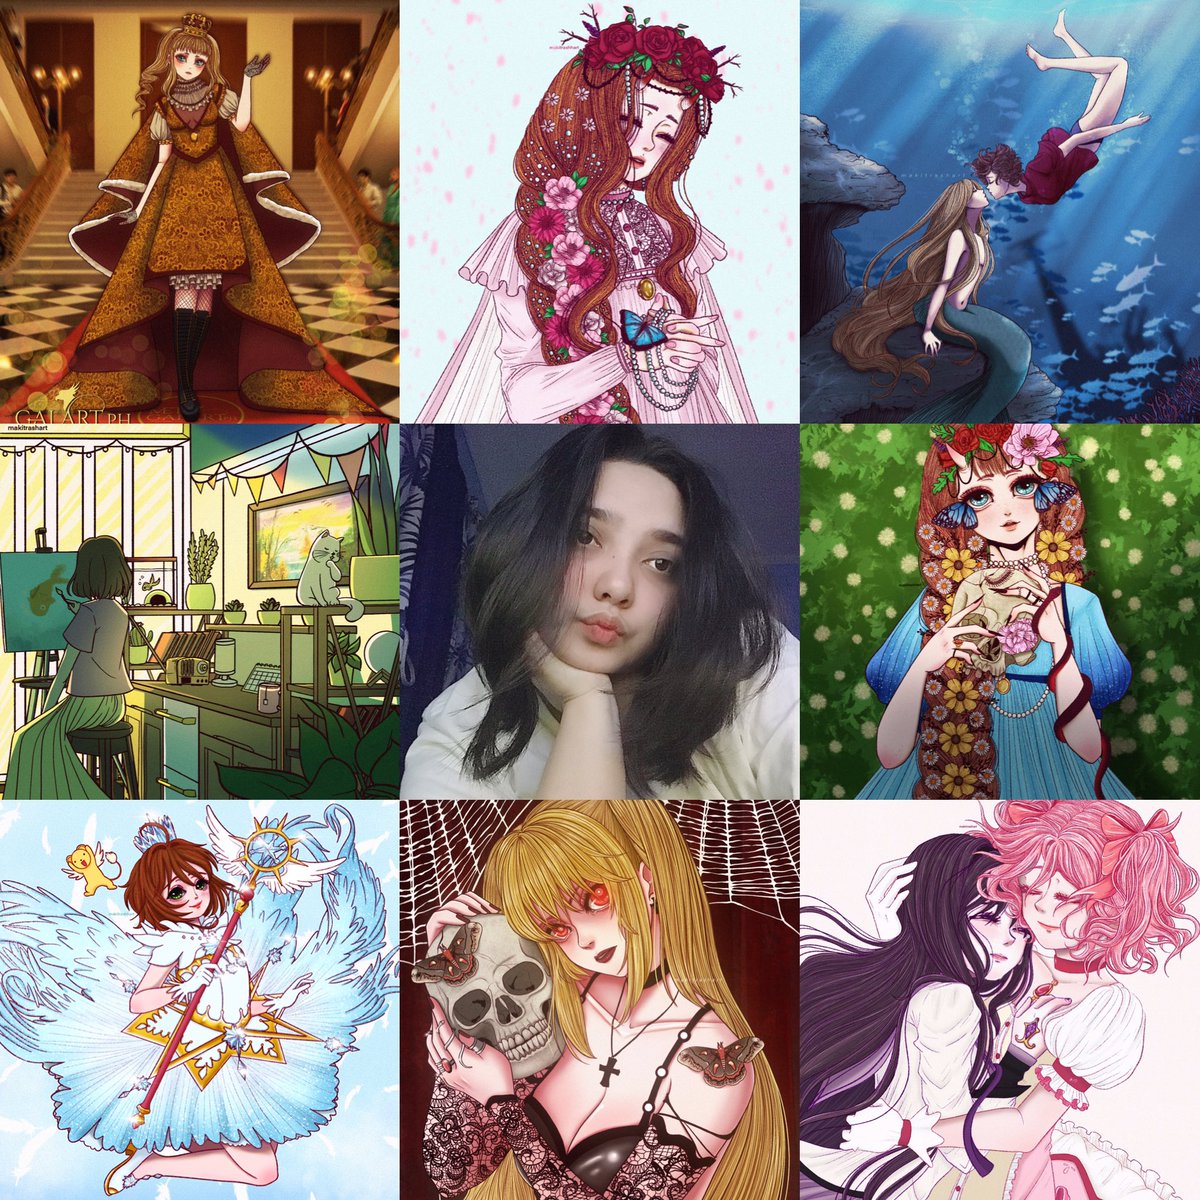 And here's an #artvsartist2021 with some of my fave non genshin related art HAHAHAHA 